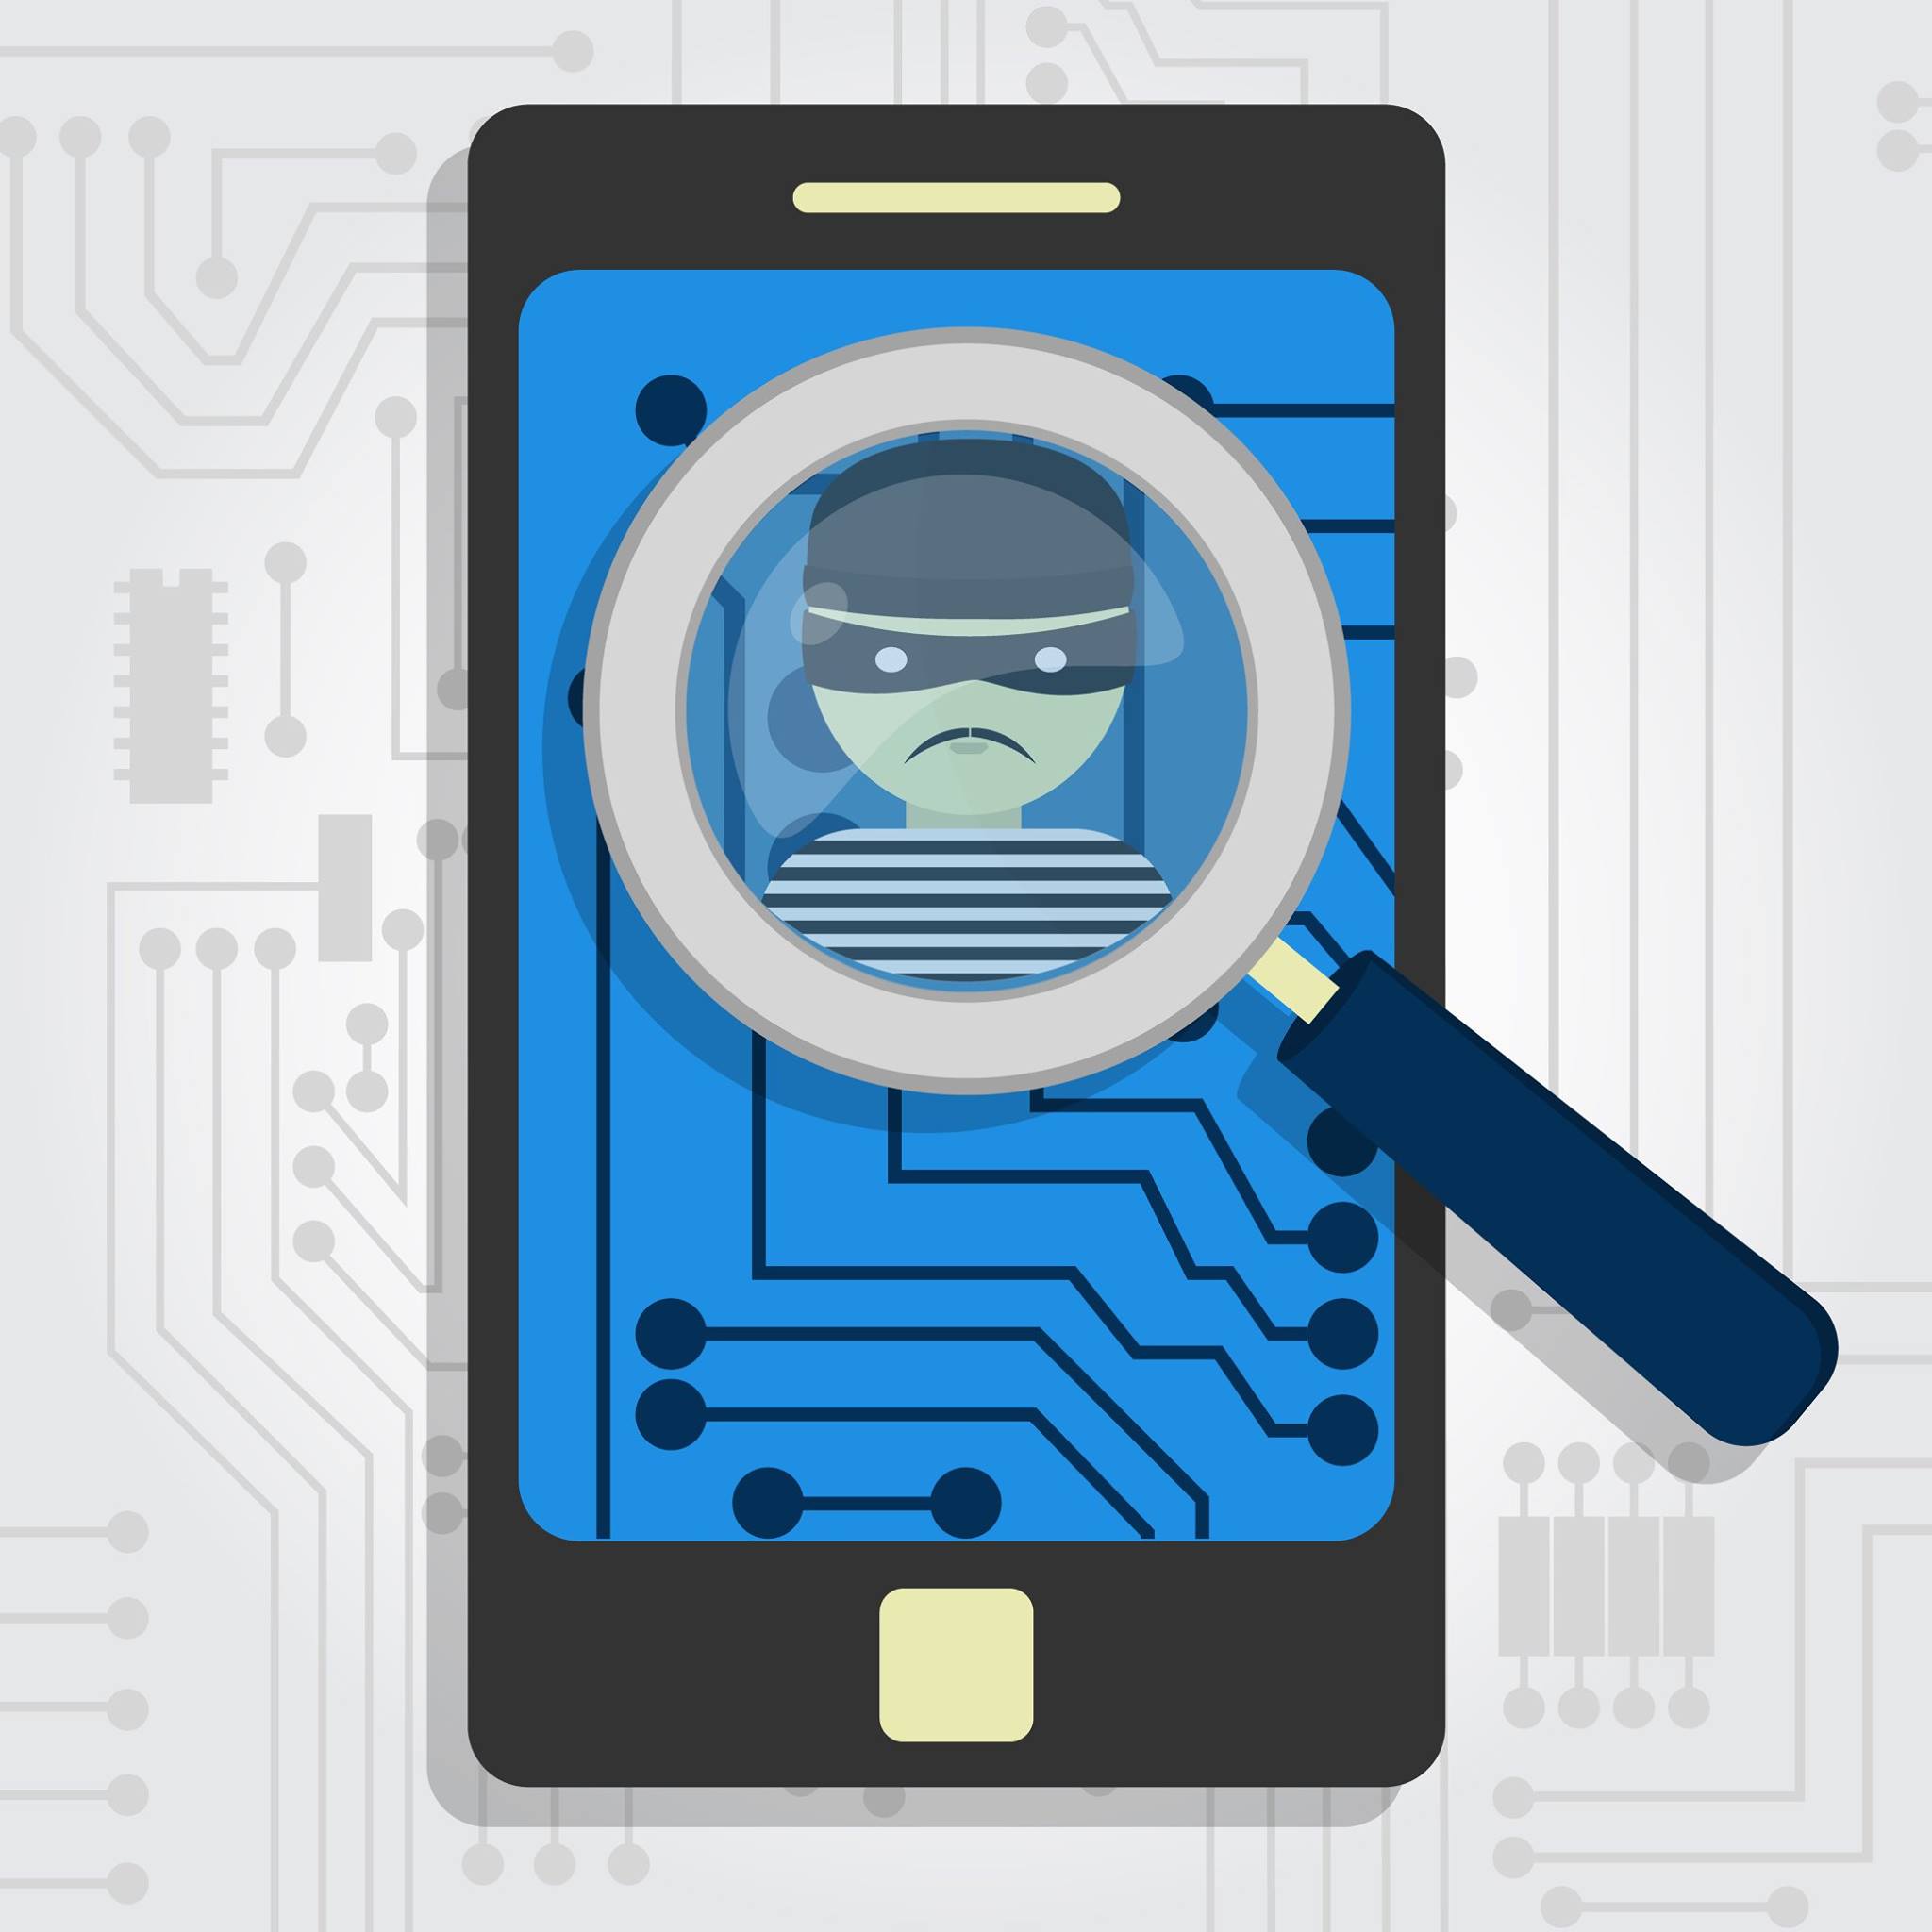 MALWARE ALERT! Cybercriminals Targeting Android Devices